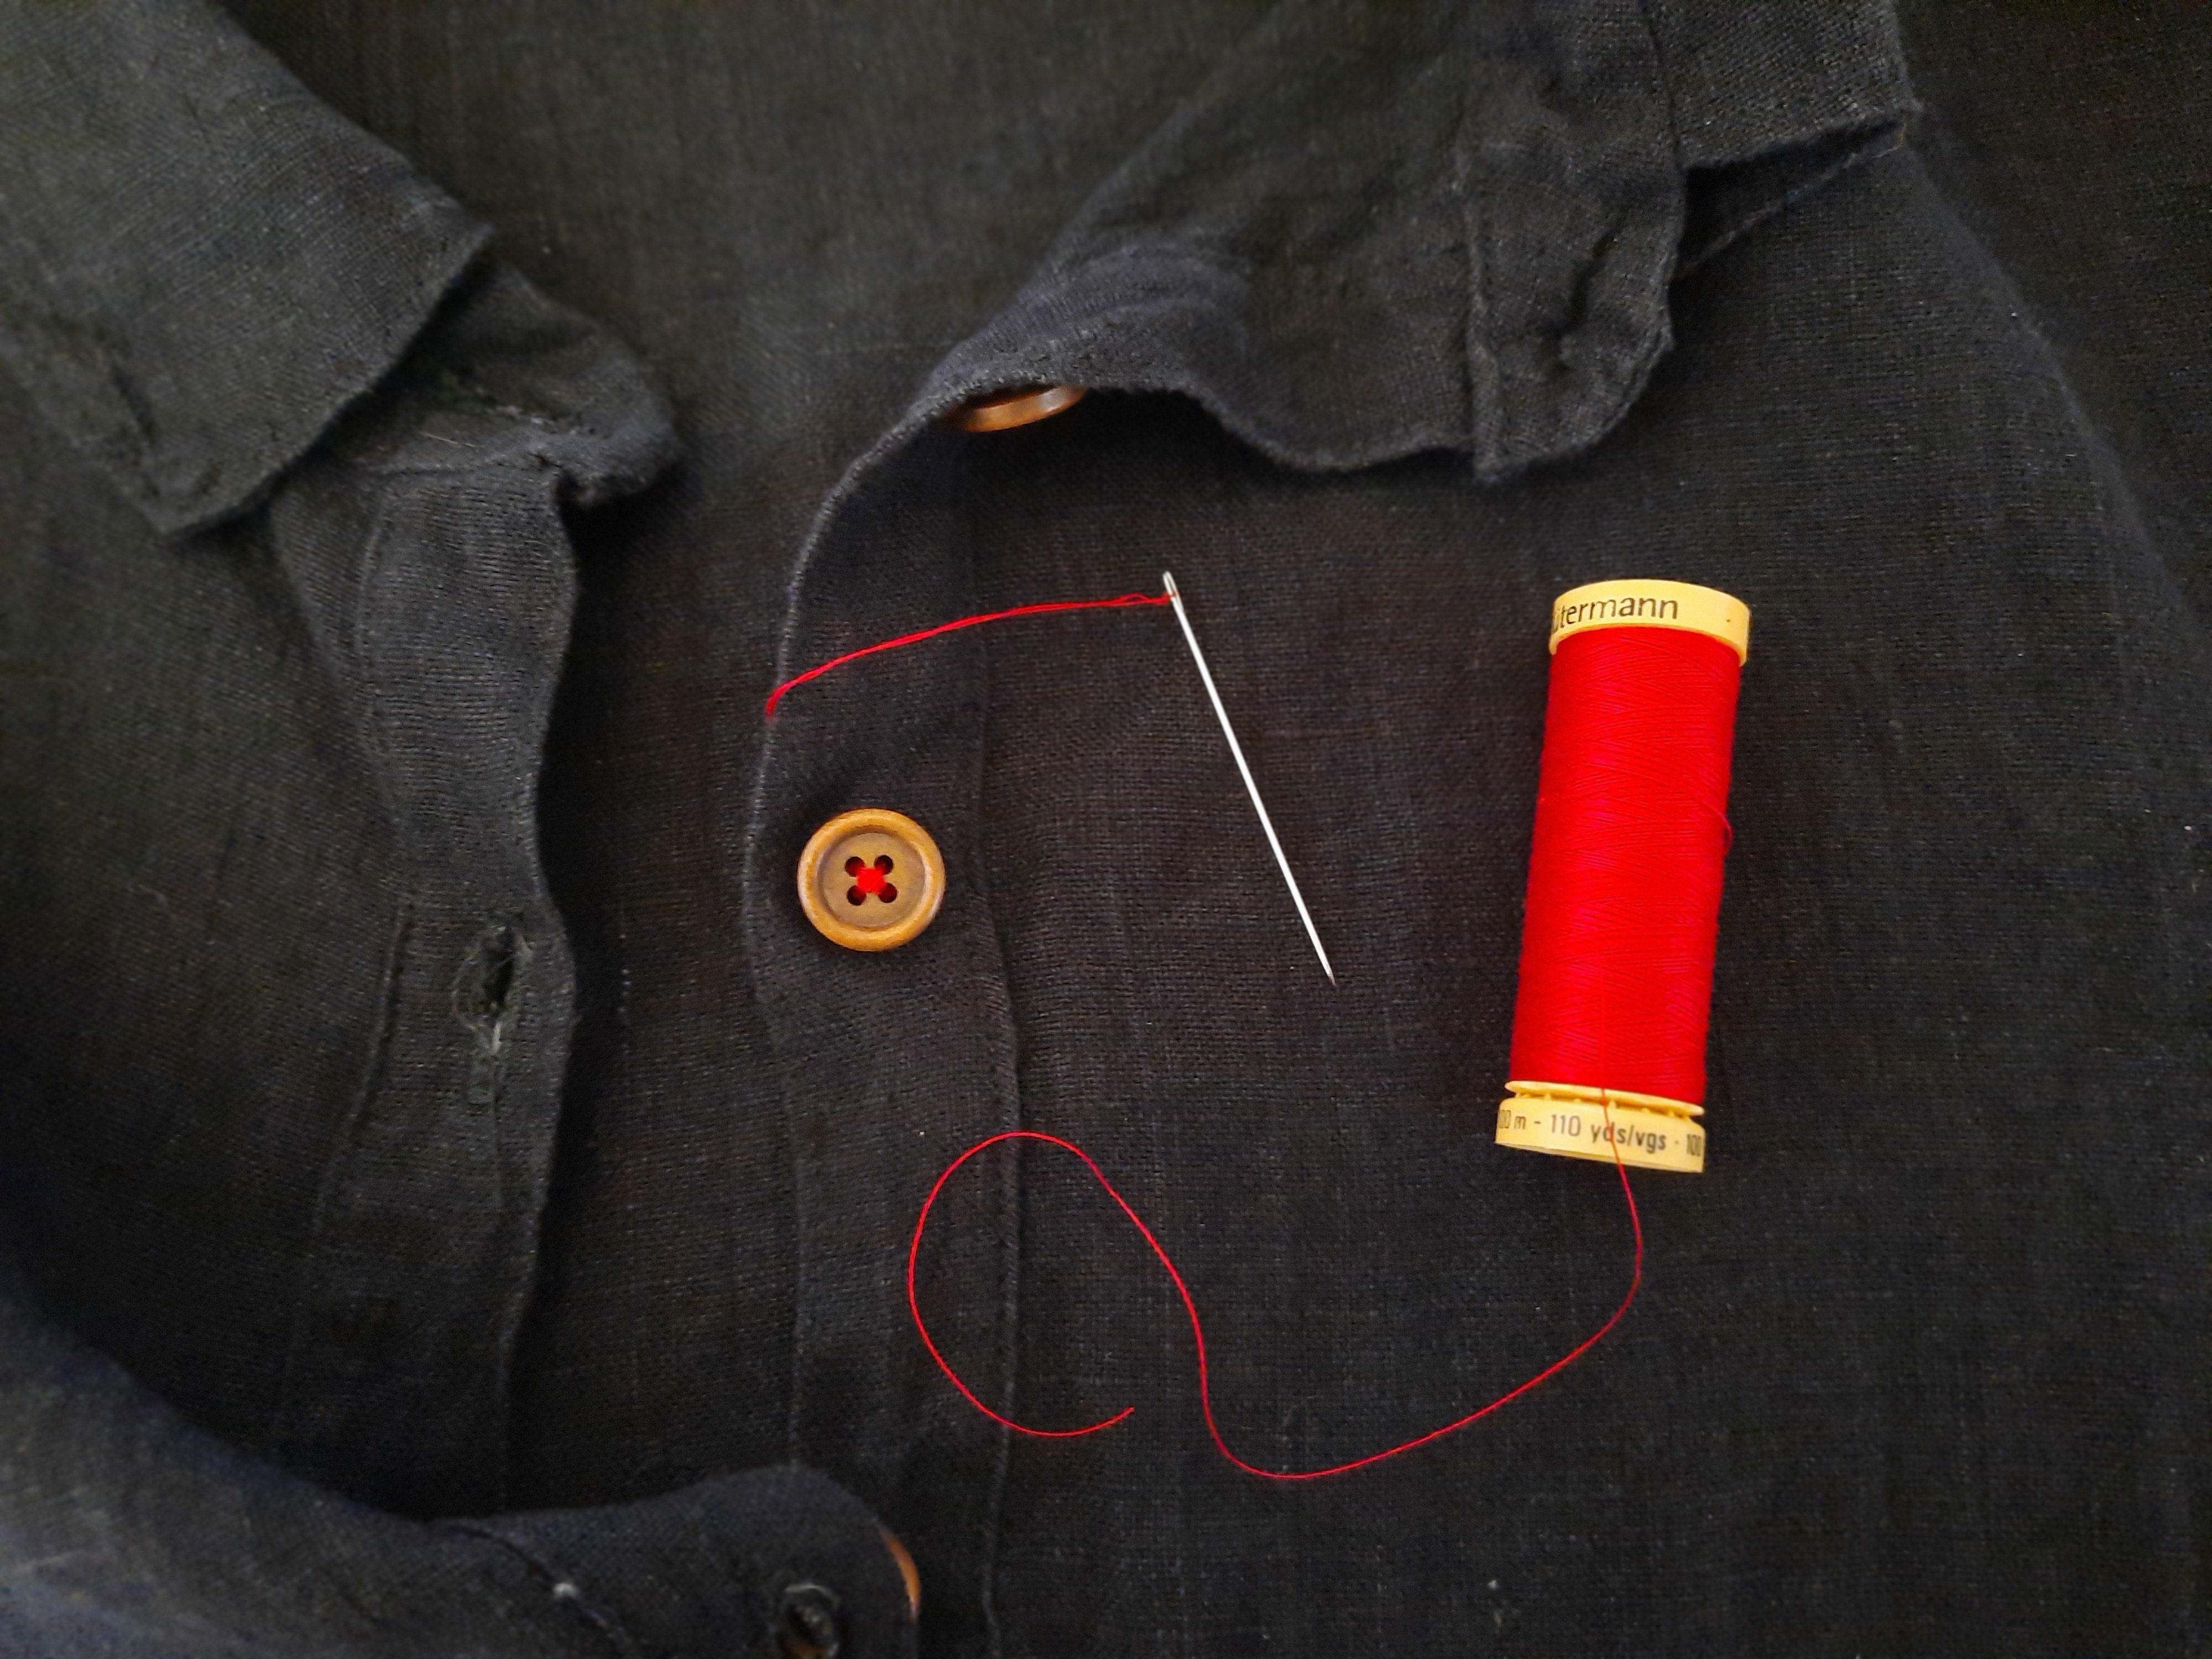 How To: Sew on a Button - Pyne and Smith Clothiers